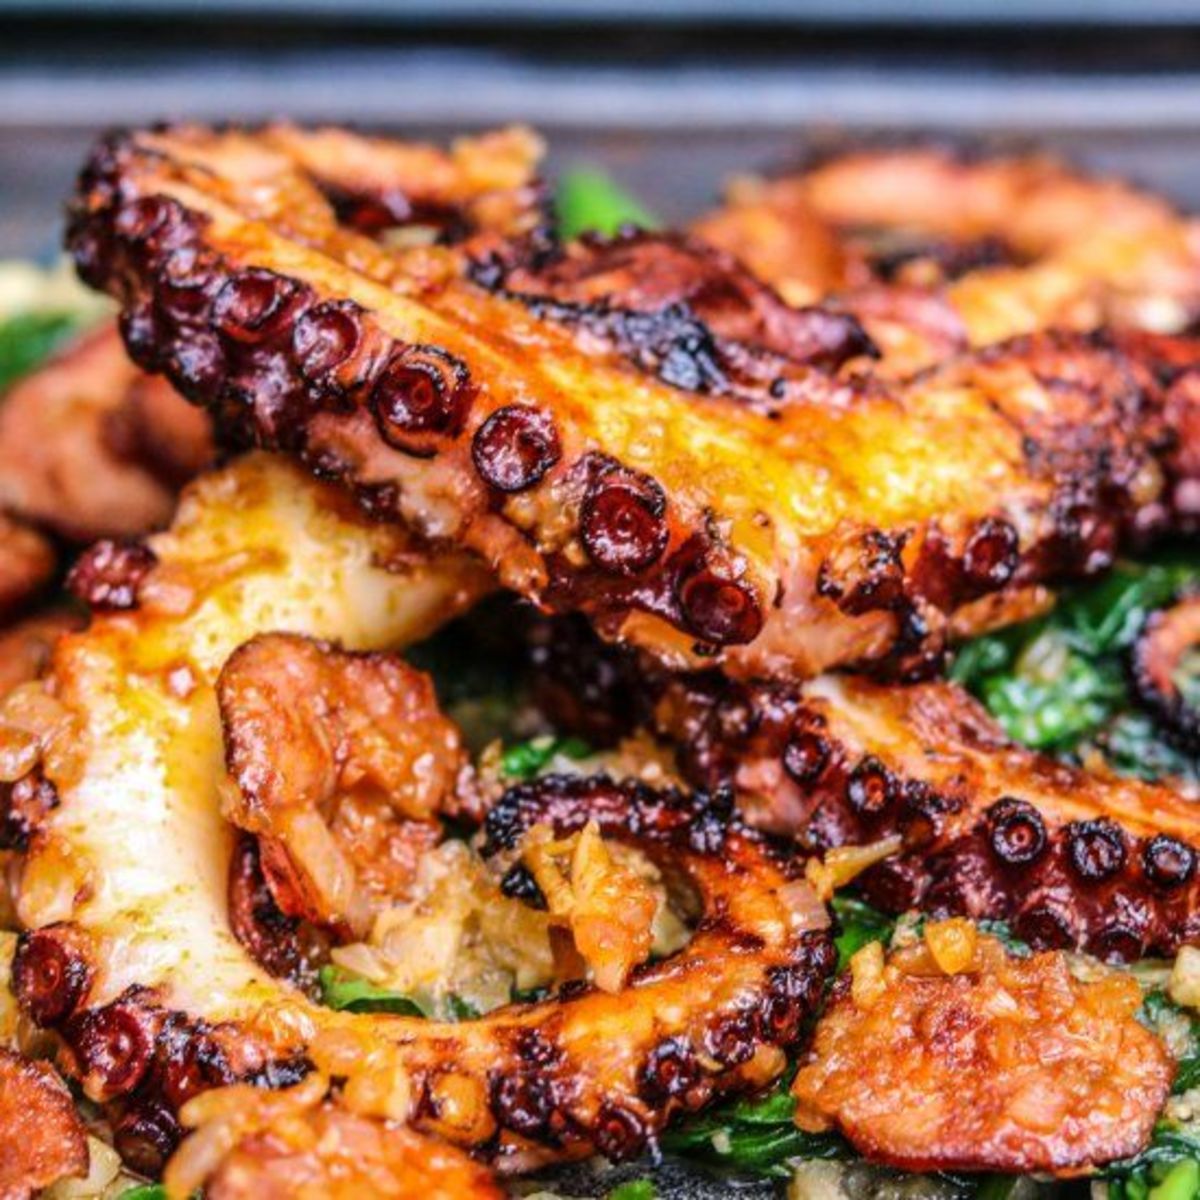 Braised Octopus Seafood Recipes For Dinner